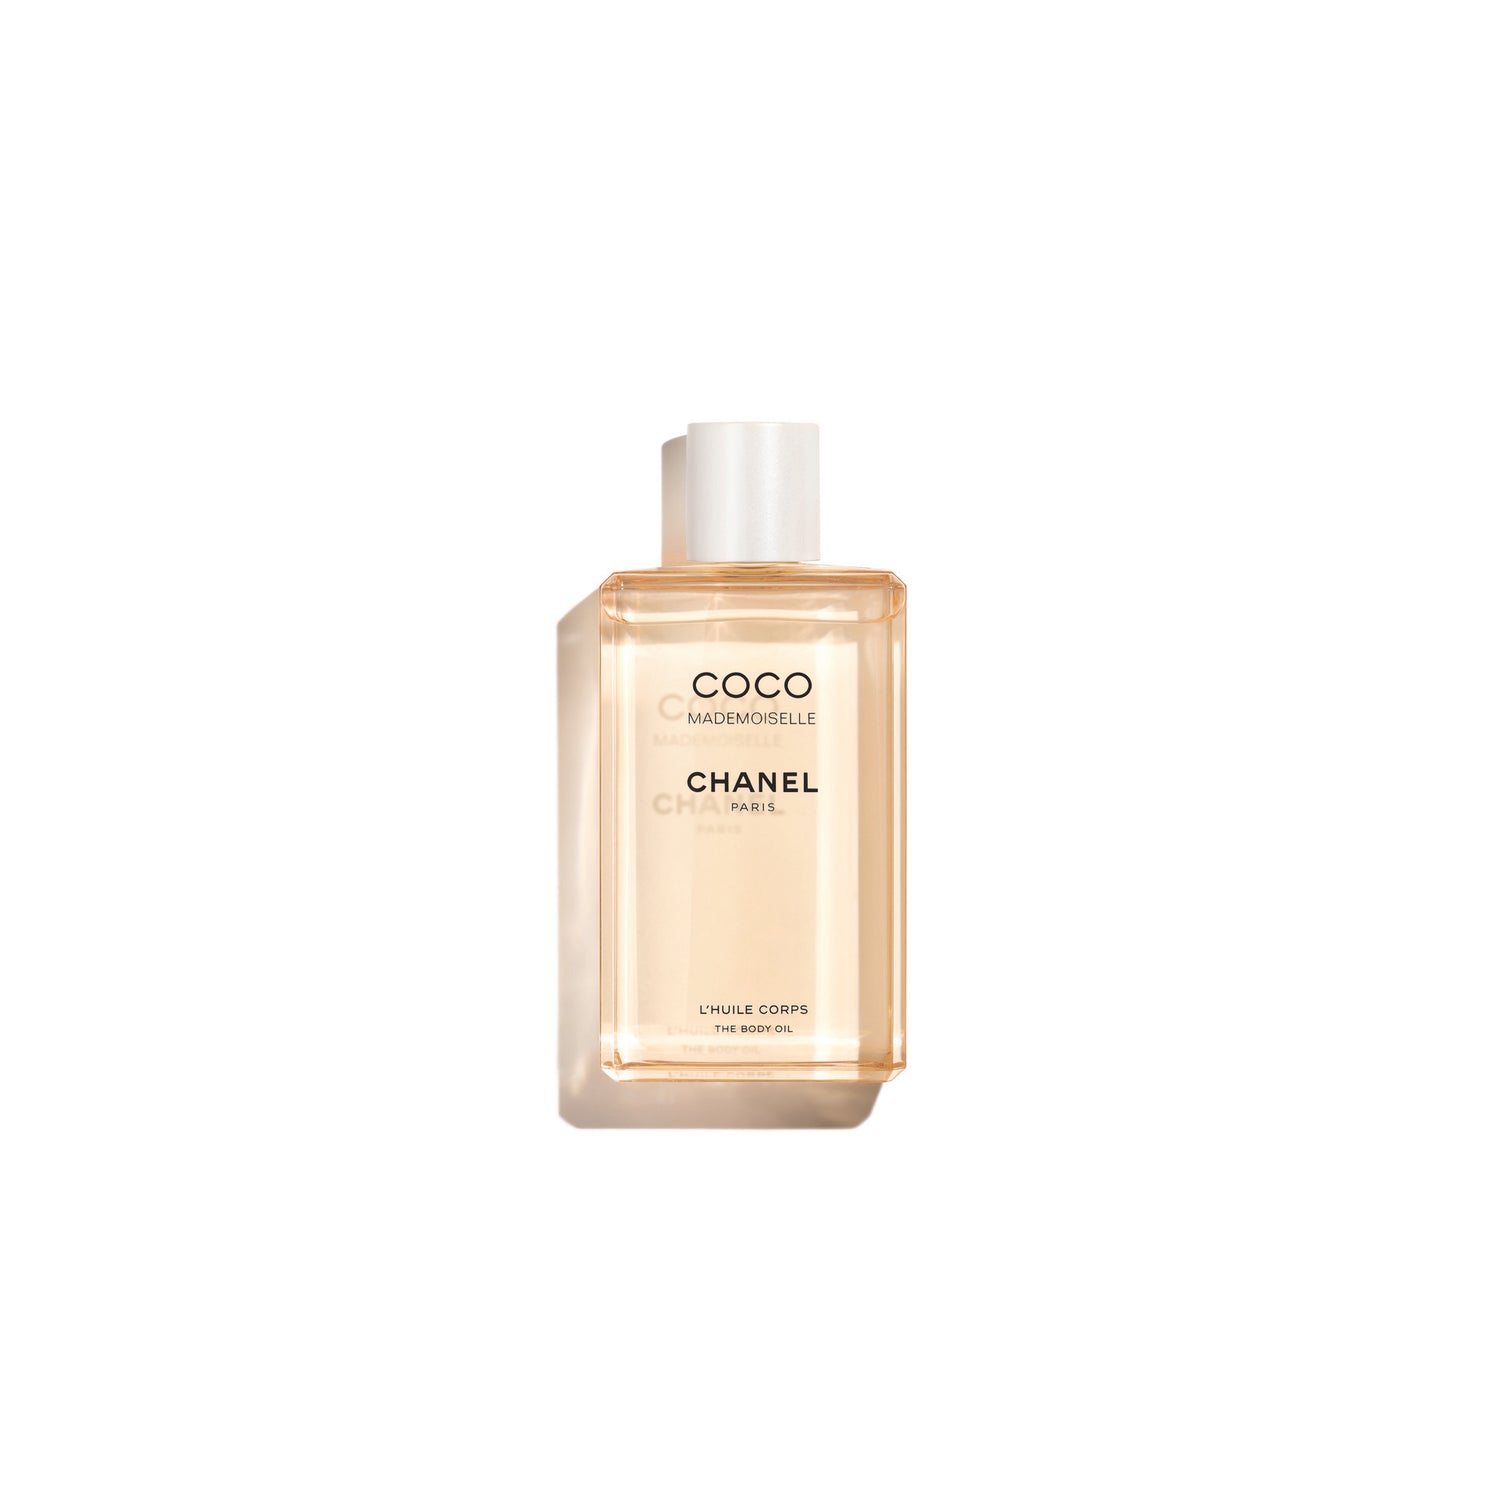 Chanel Coco Mademoiselle L&